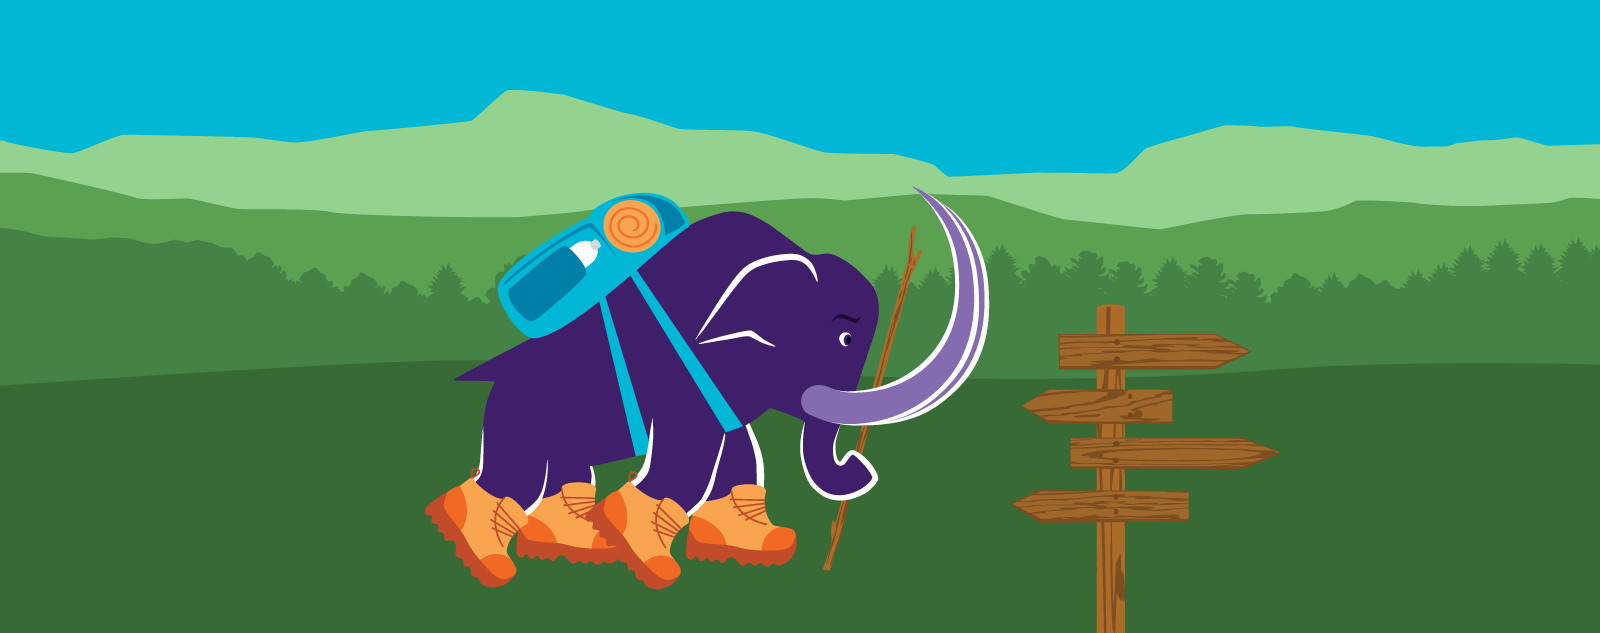 illustration of a purple mammoth wearing hiking boots, a trail sign, and mountains in the background